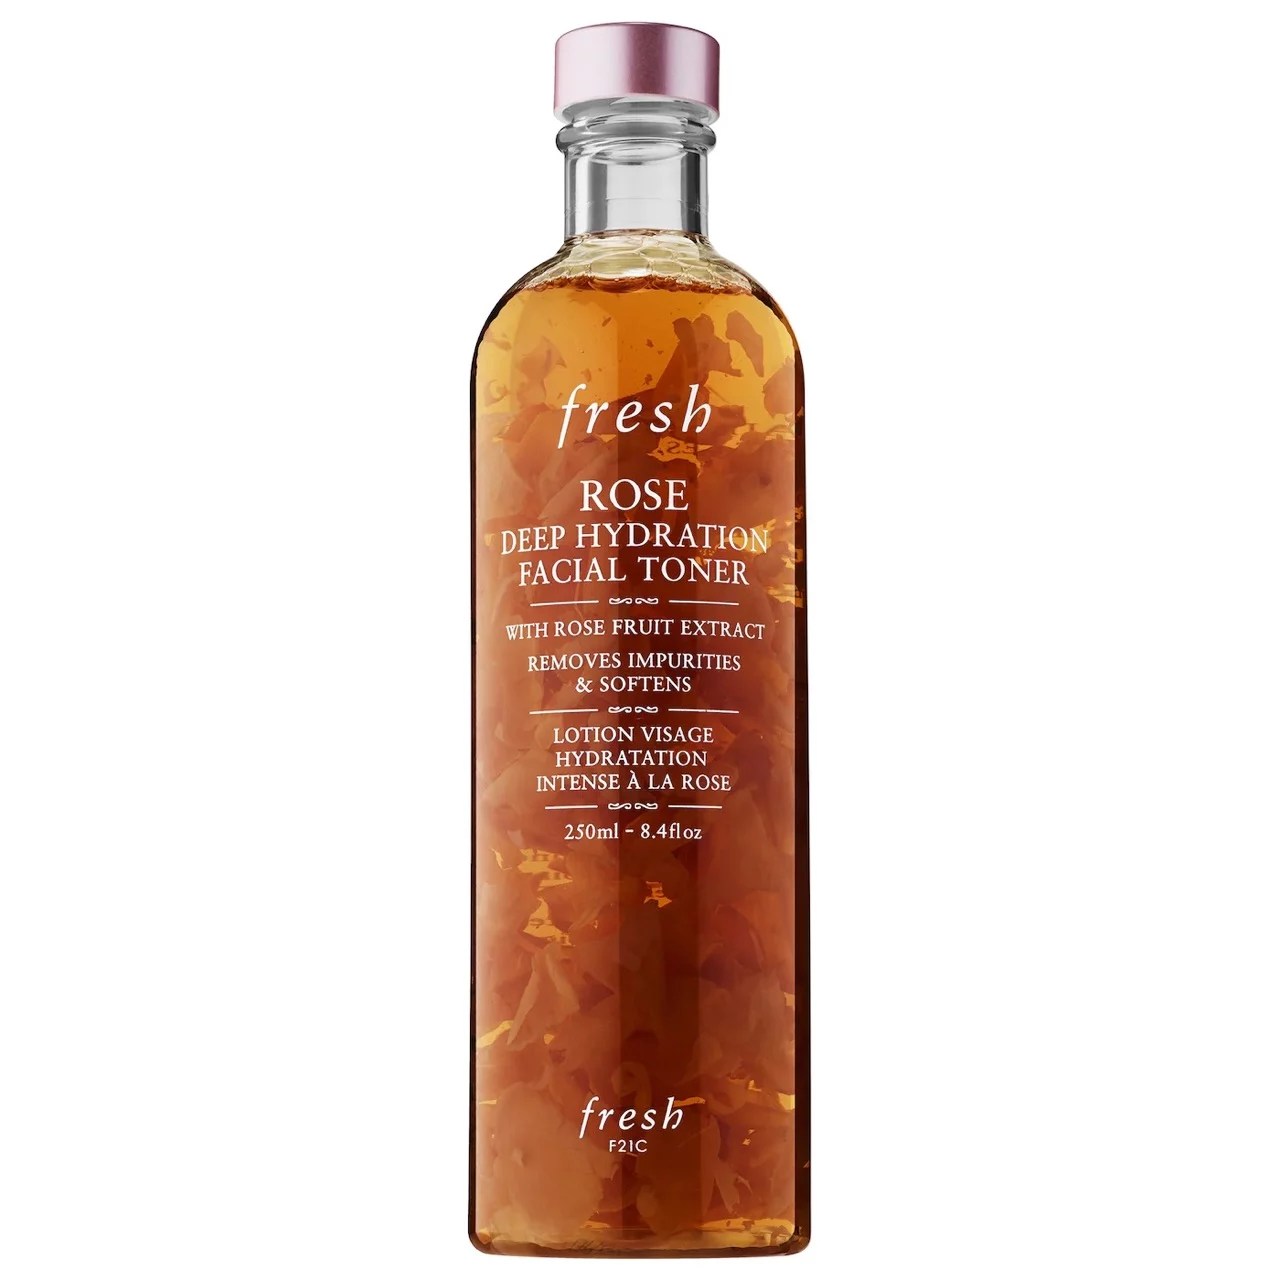 A bottle of the Fresh Rose Deep Hydration Facial Toner.